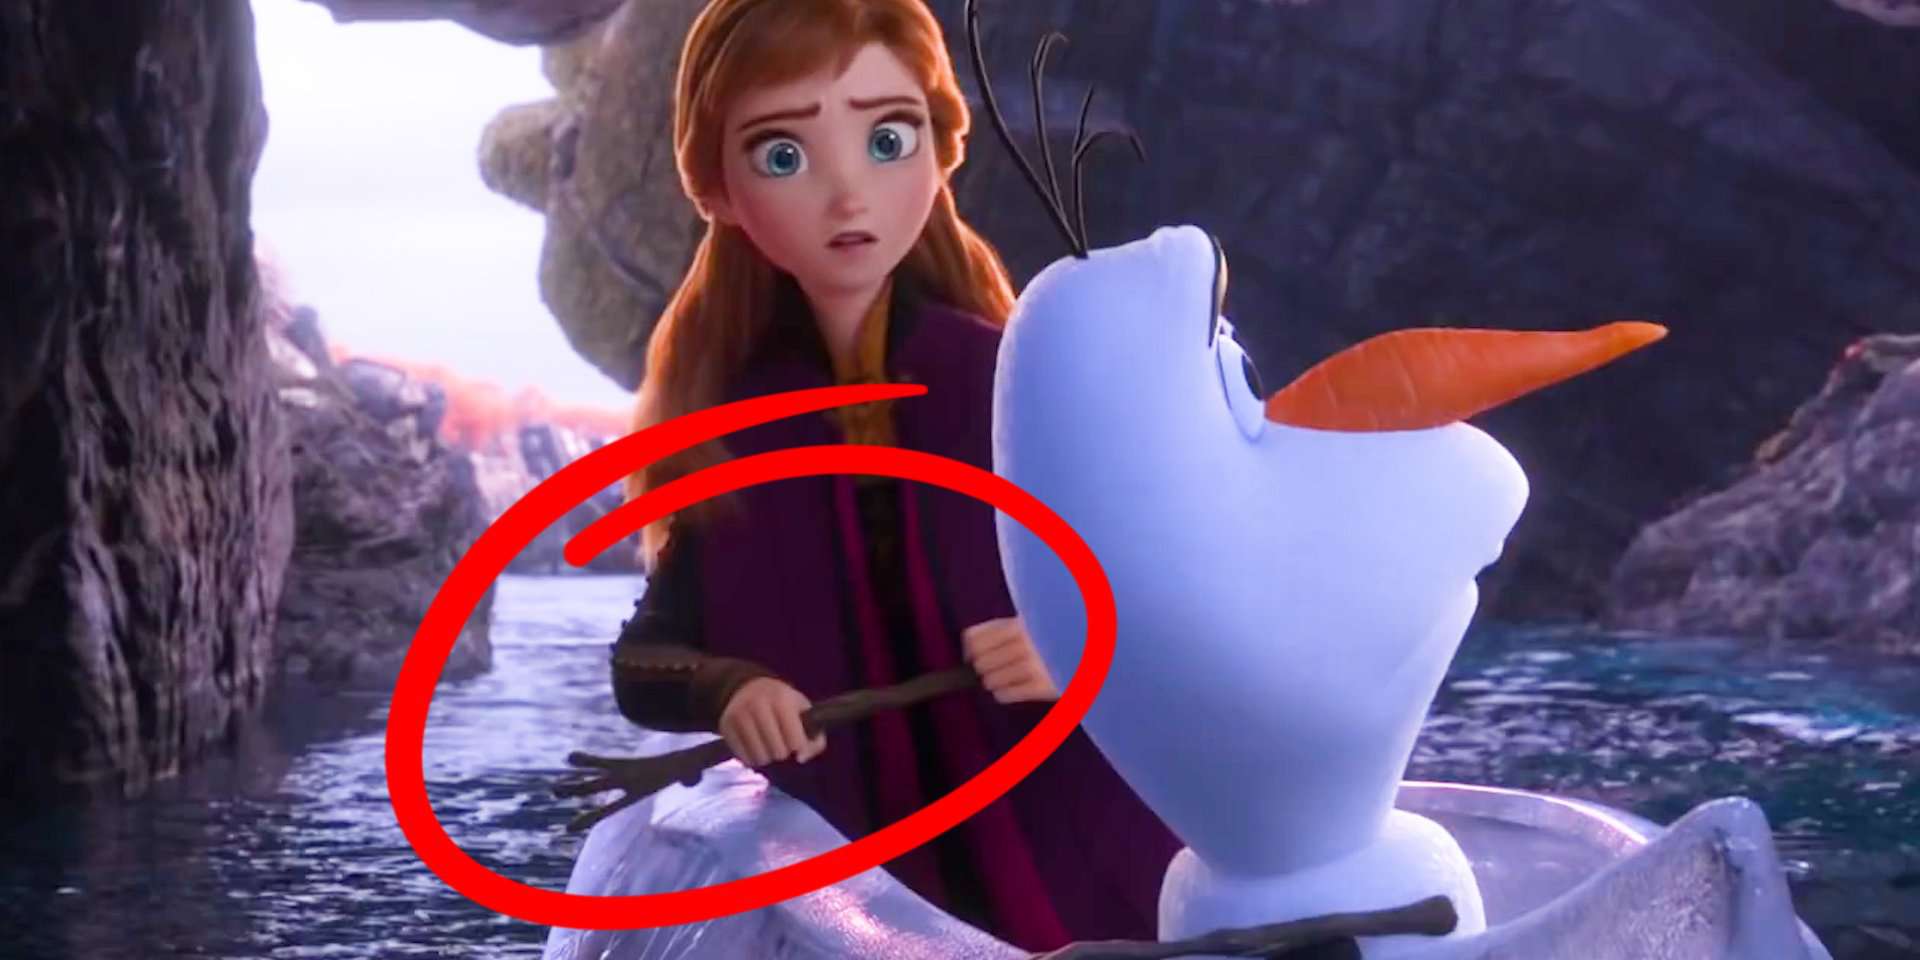 Taboola Ad Example 52818 - 12 Details In The 'Frozen 2' Trailer You Might Have Missed